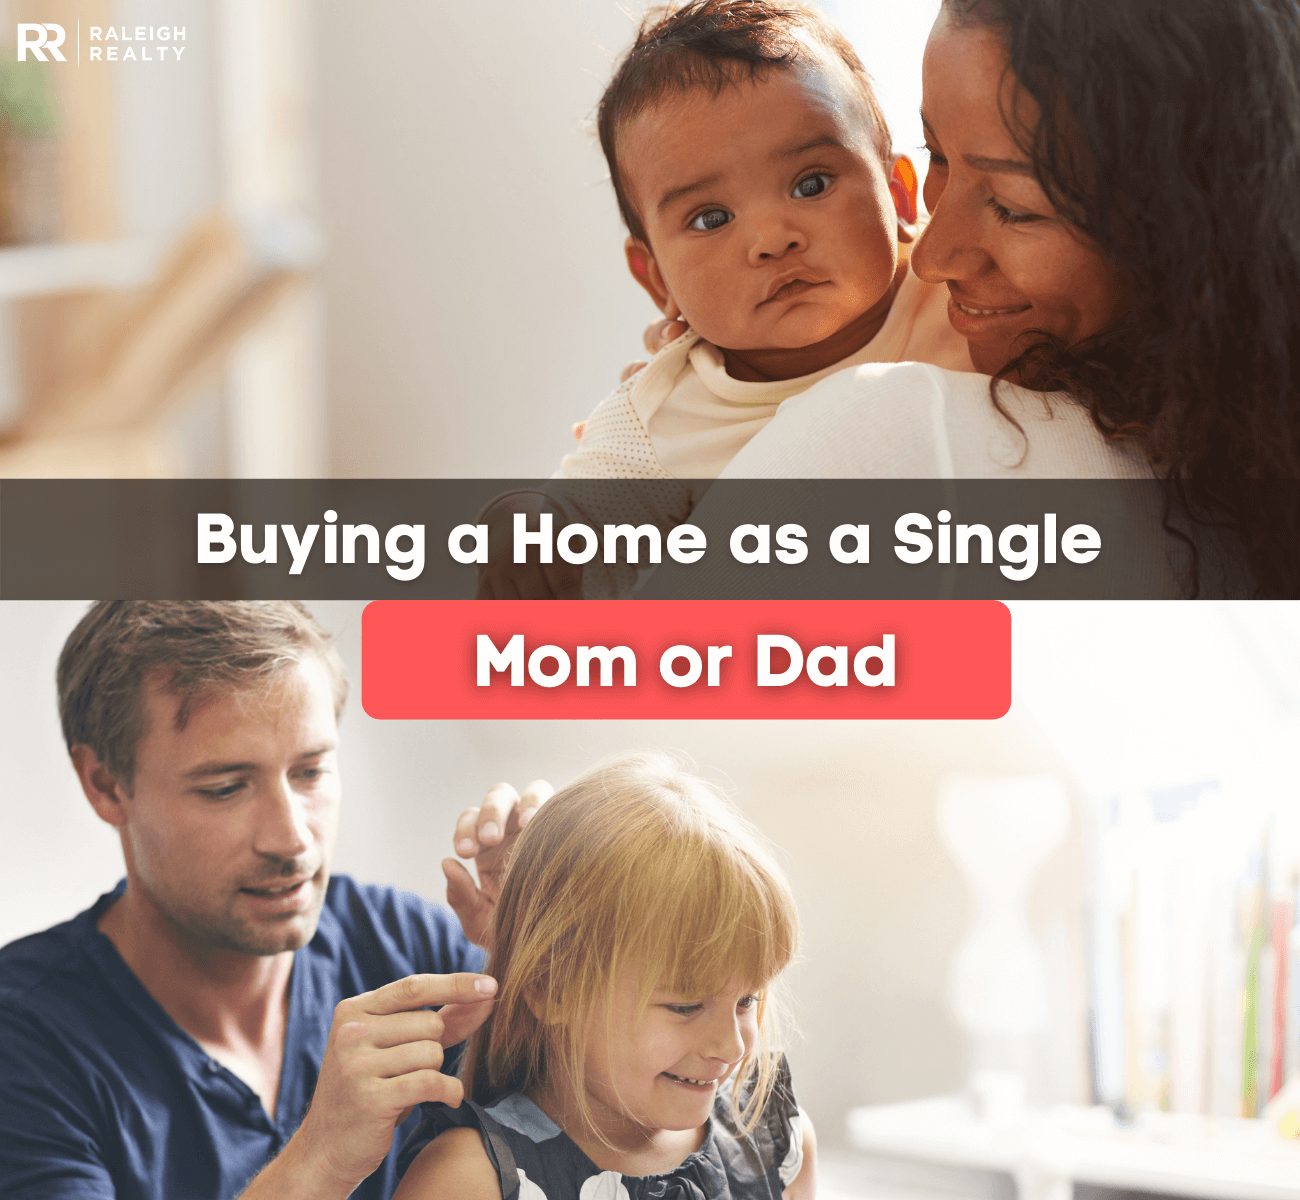 How to Buy a Home as a Single Mom or Dad